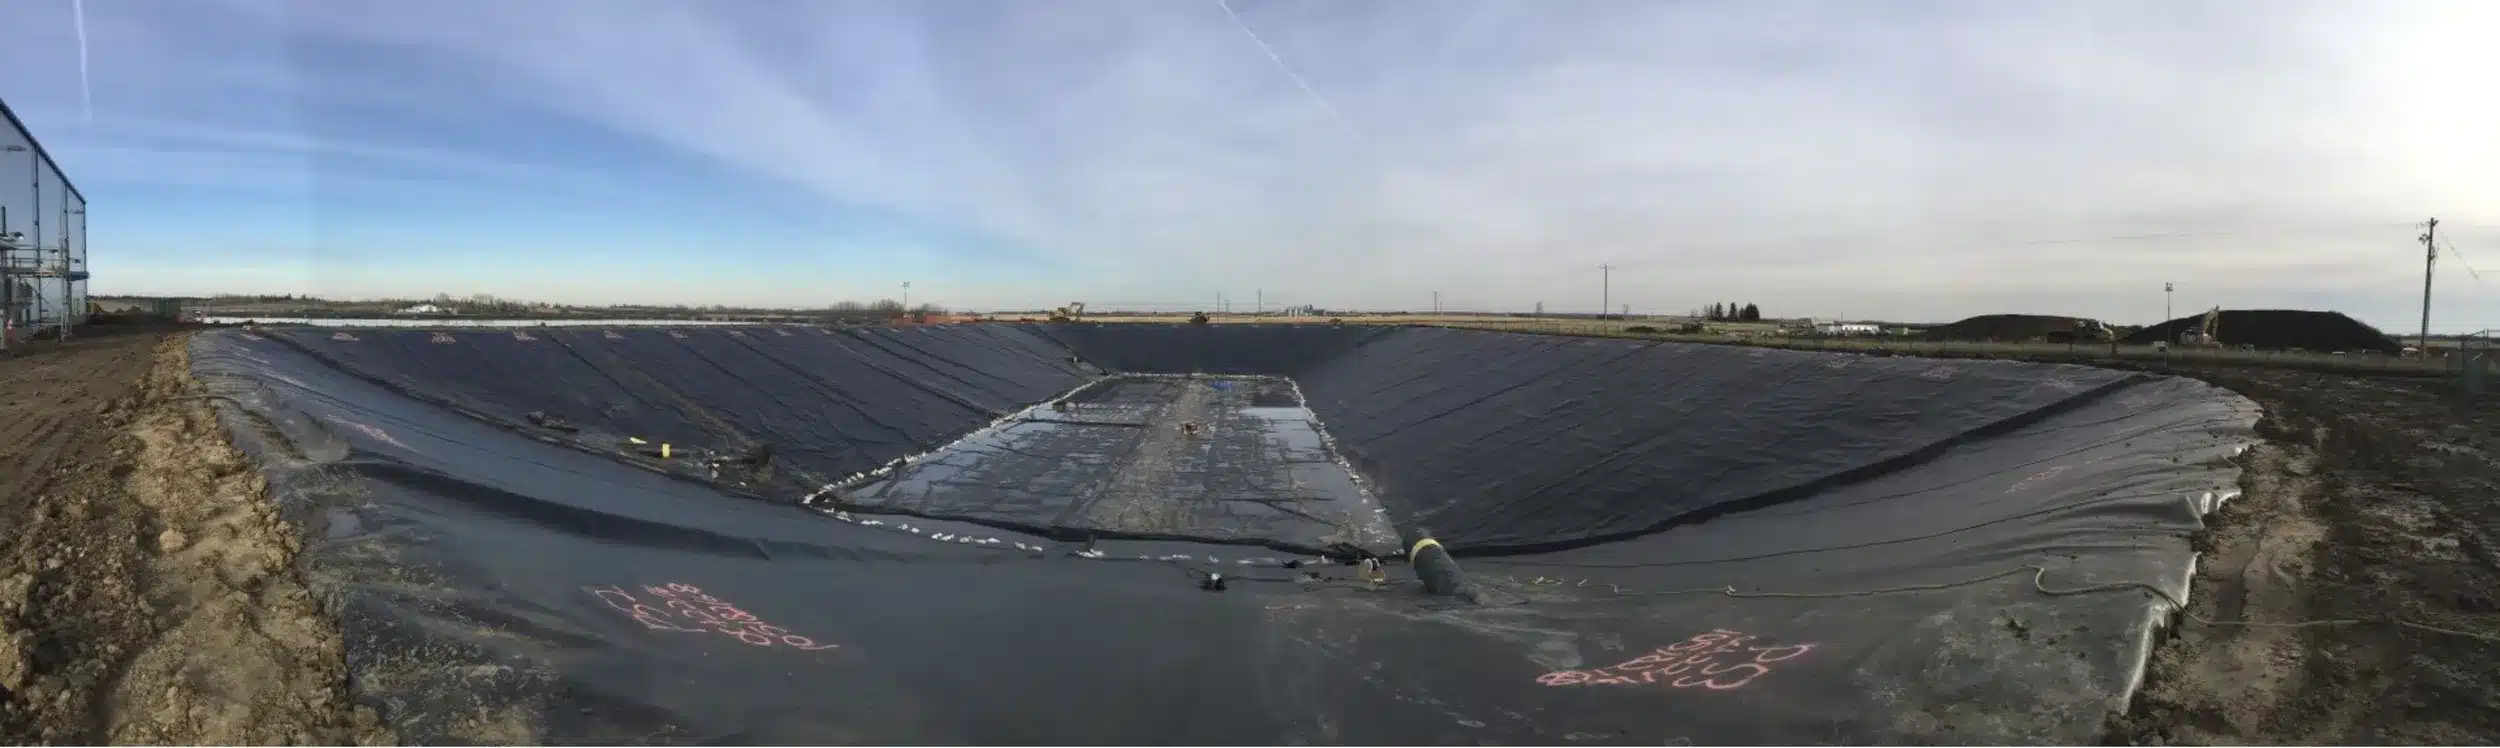 HDPE Liners: The Heavy-Duty Solution for Environmental Engineering